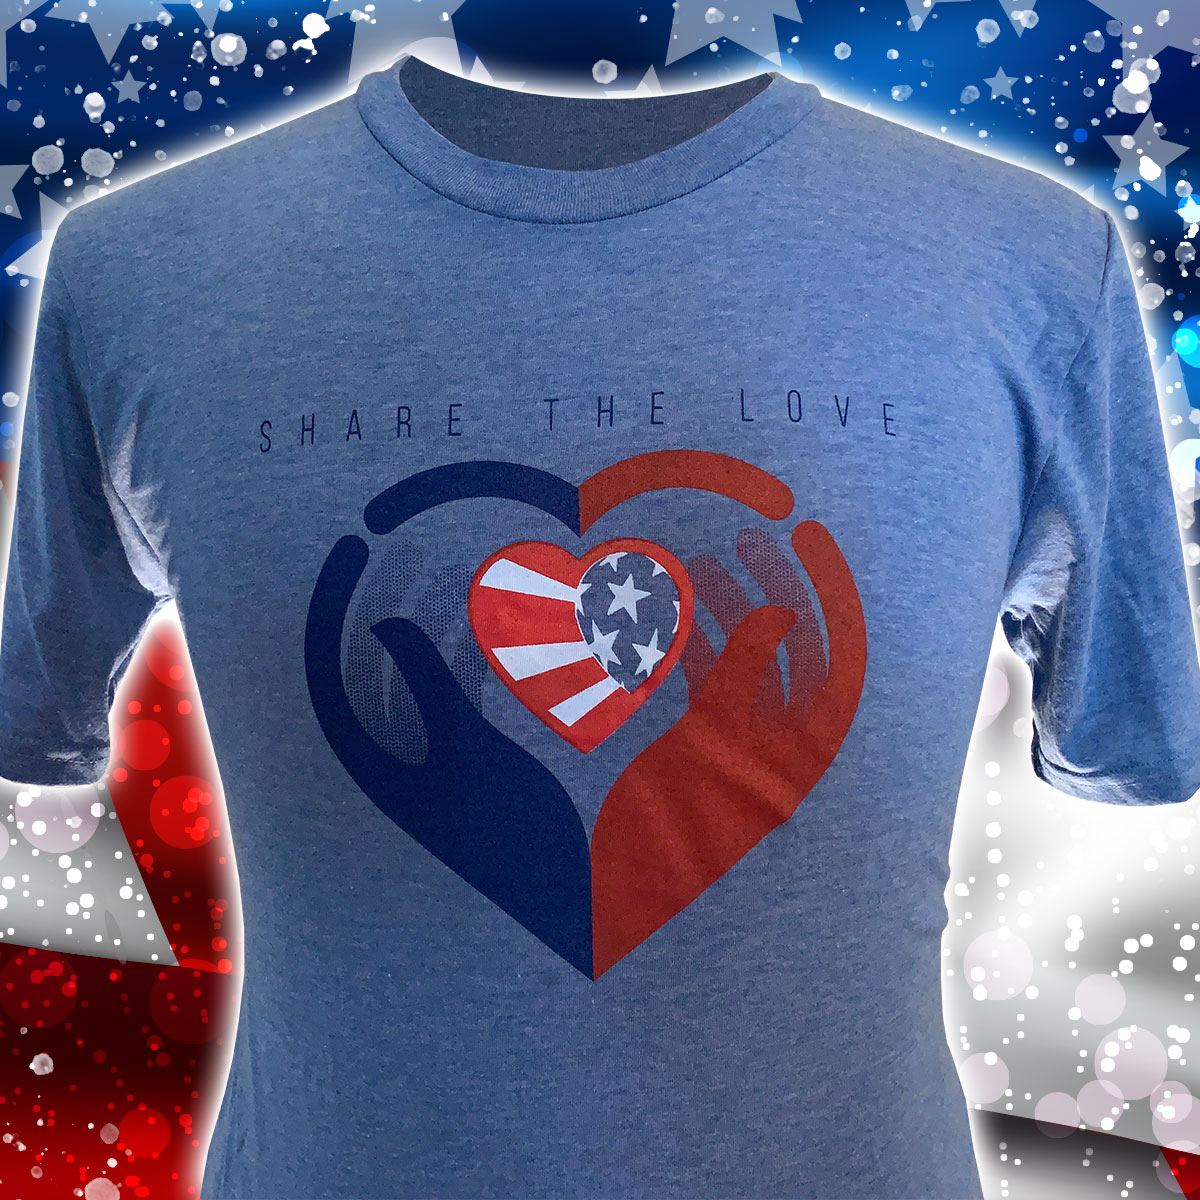 The Share the Love T-Shirt